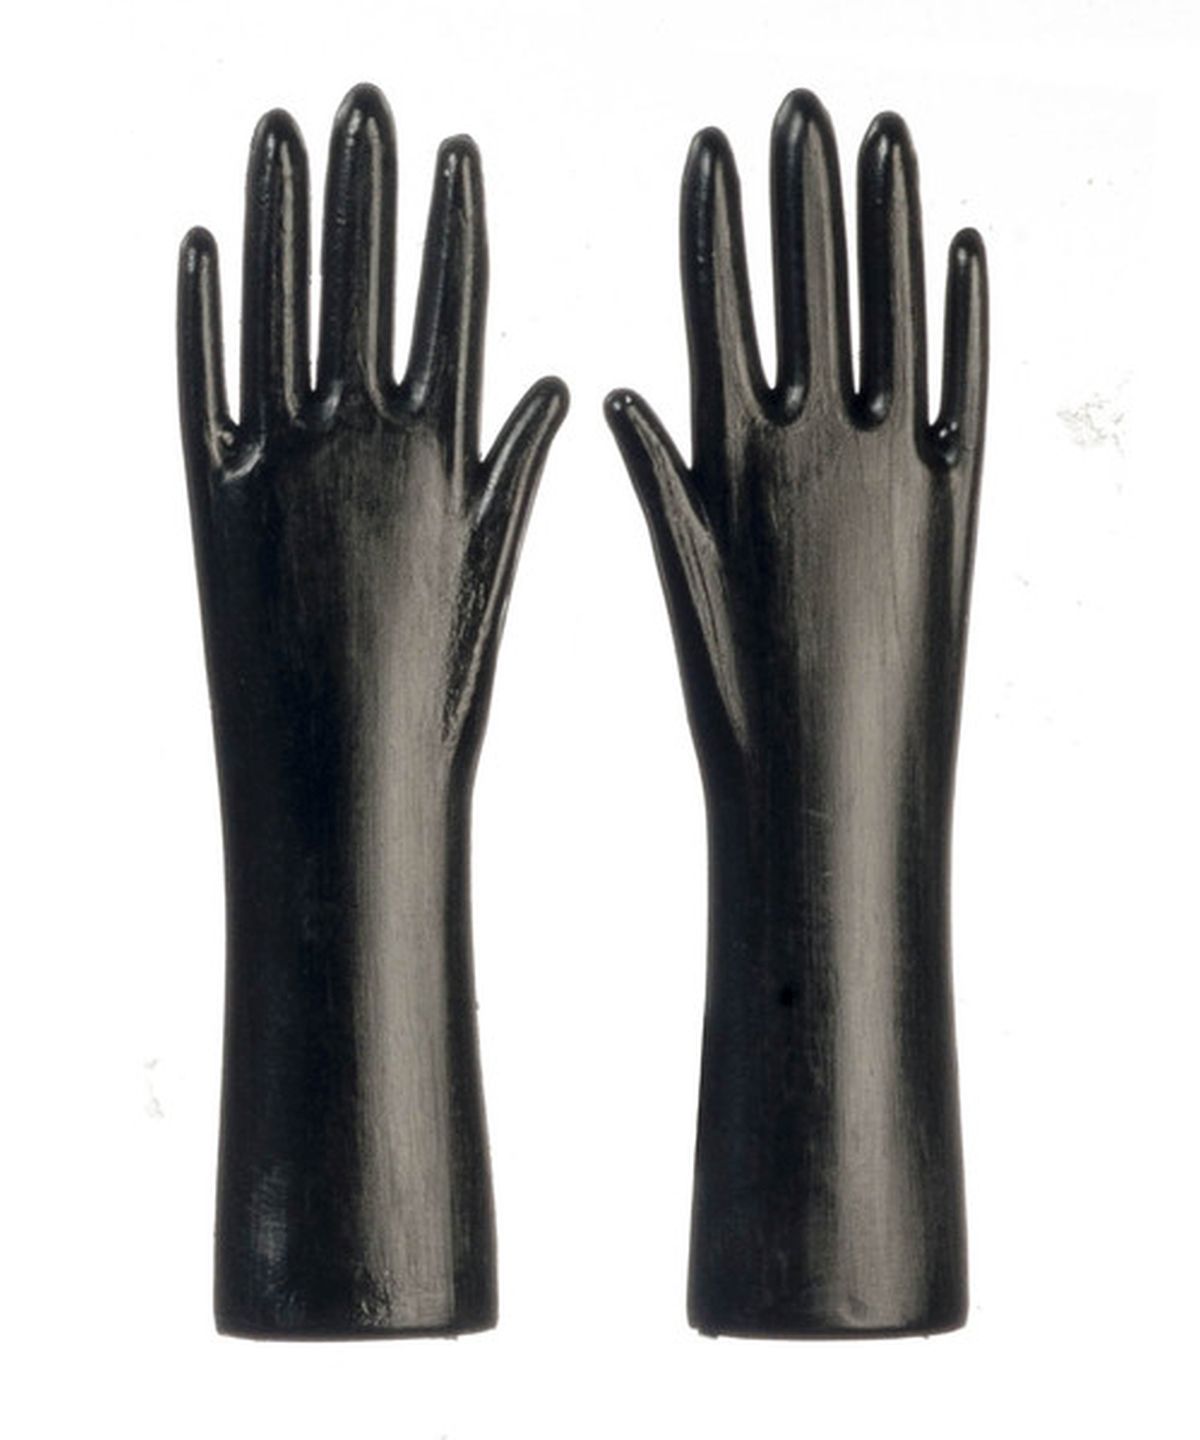 Black Rubber Gloves by International Miniatures